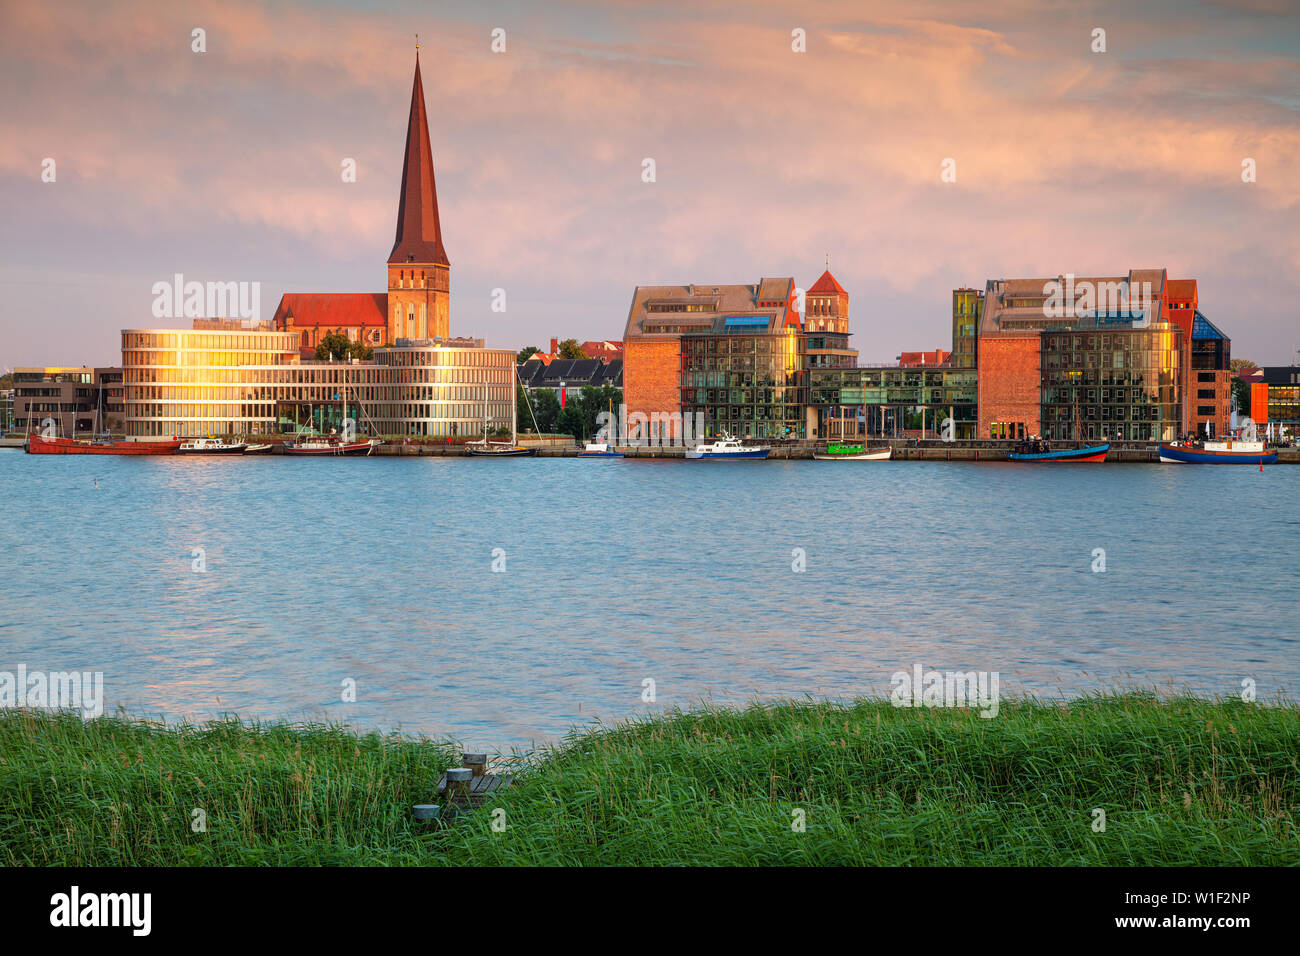 Rostock, Germany. Cityscape image of Rostock riverside with St. Peter's Church during summer sunset. Stock Photo